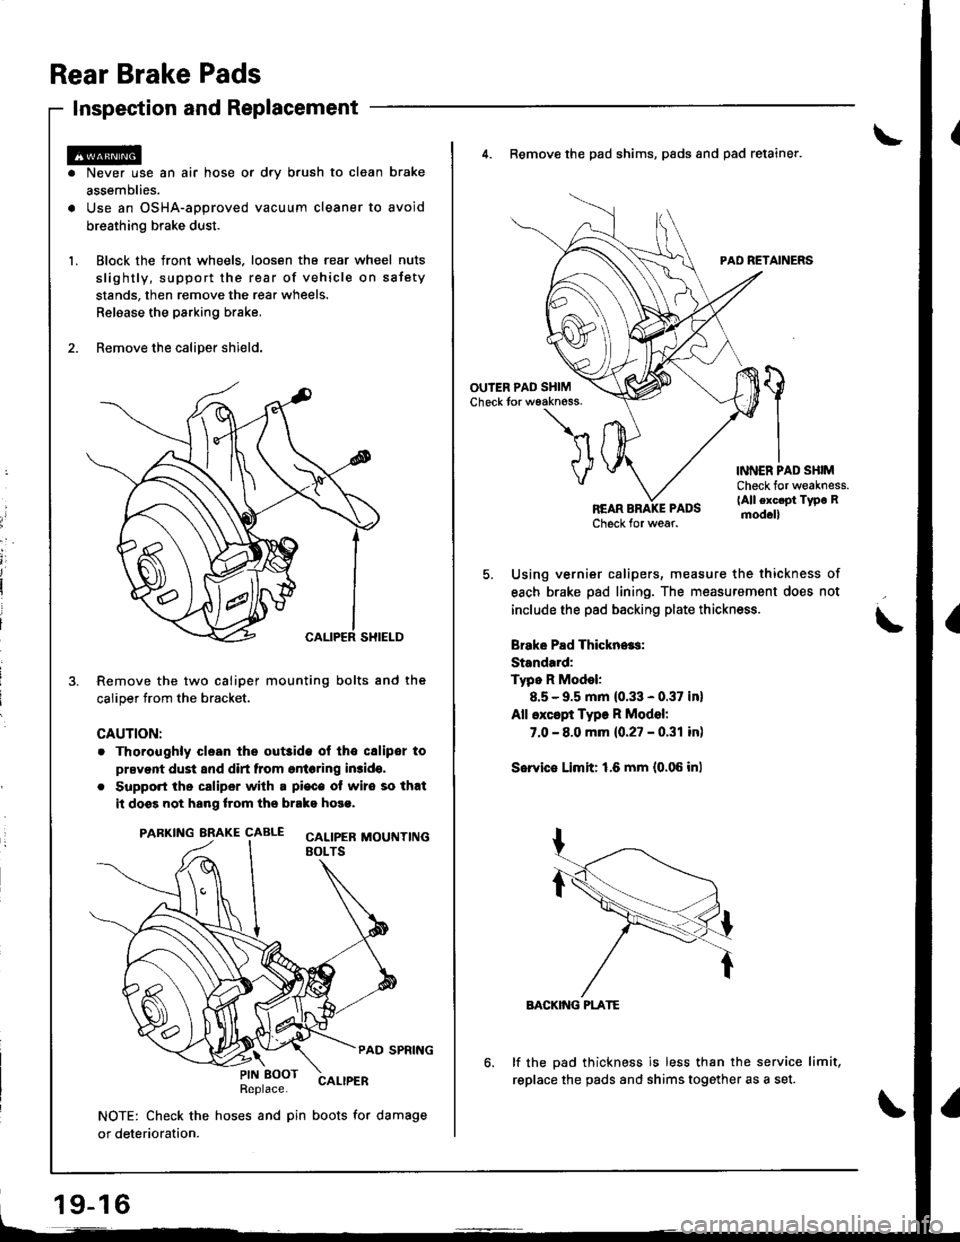 HONDA INTEGRA 1998 4.G Workshop Manual Rear Brake Pads
Inspection and Replacement
Never use an air hose or dry b.ush to clean brake
assemblies.
Use an OSHA-approved vacuum cleaner to avoid
breathing brake dust.
Block the front wheels. loos